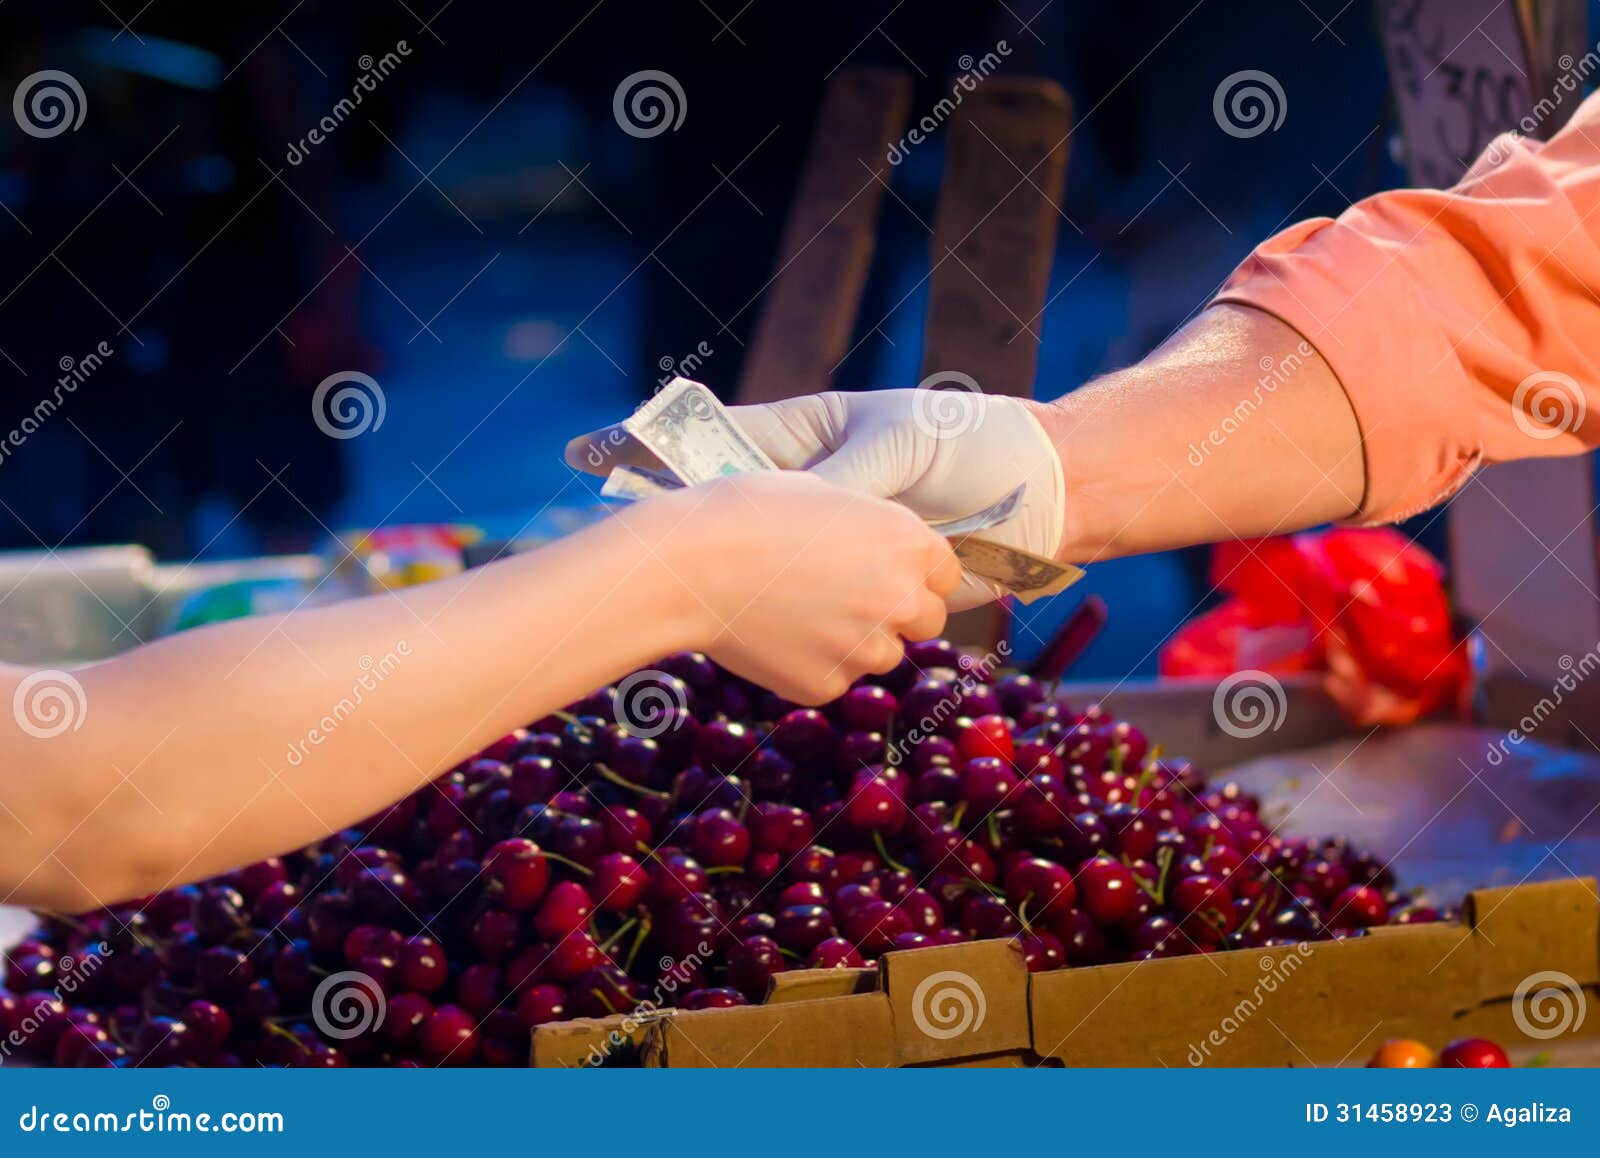 Cash Exchange at Street Fruit Stand Stock Image - Image of accept, business: 31458923